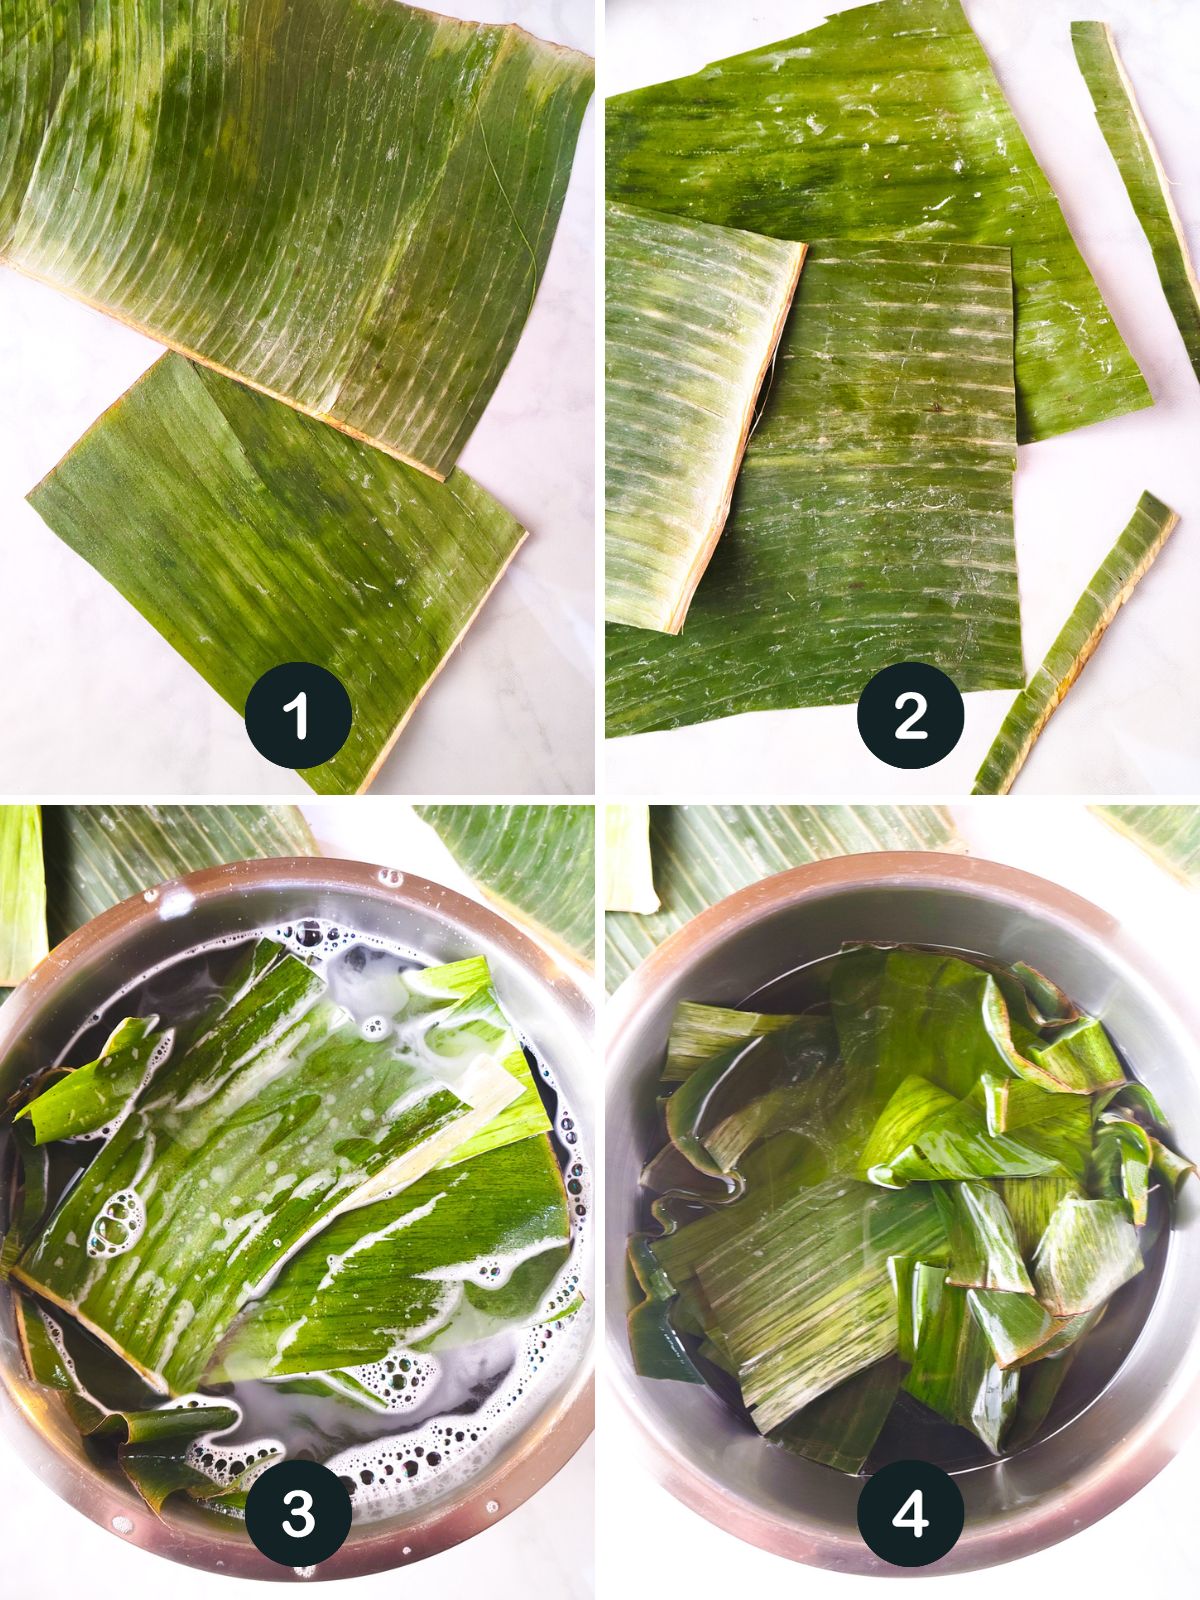 Image of the steps one through four preparing the banana leaves for the empanadas.